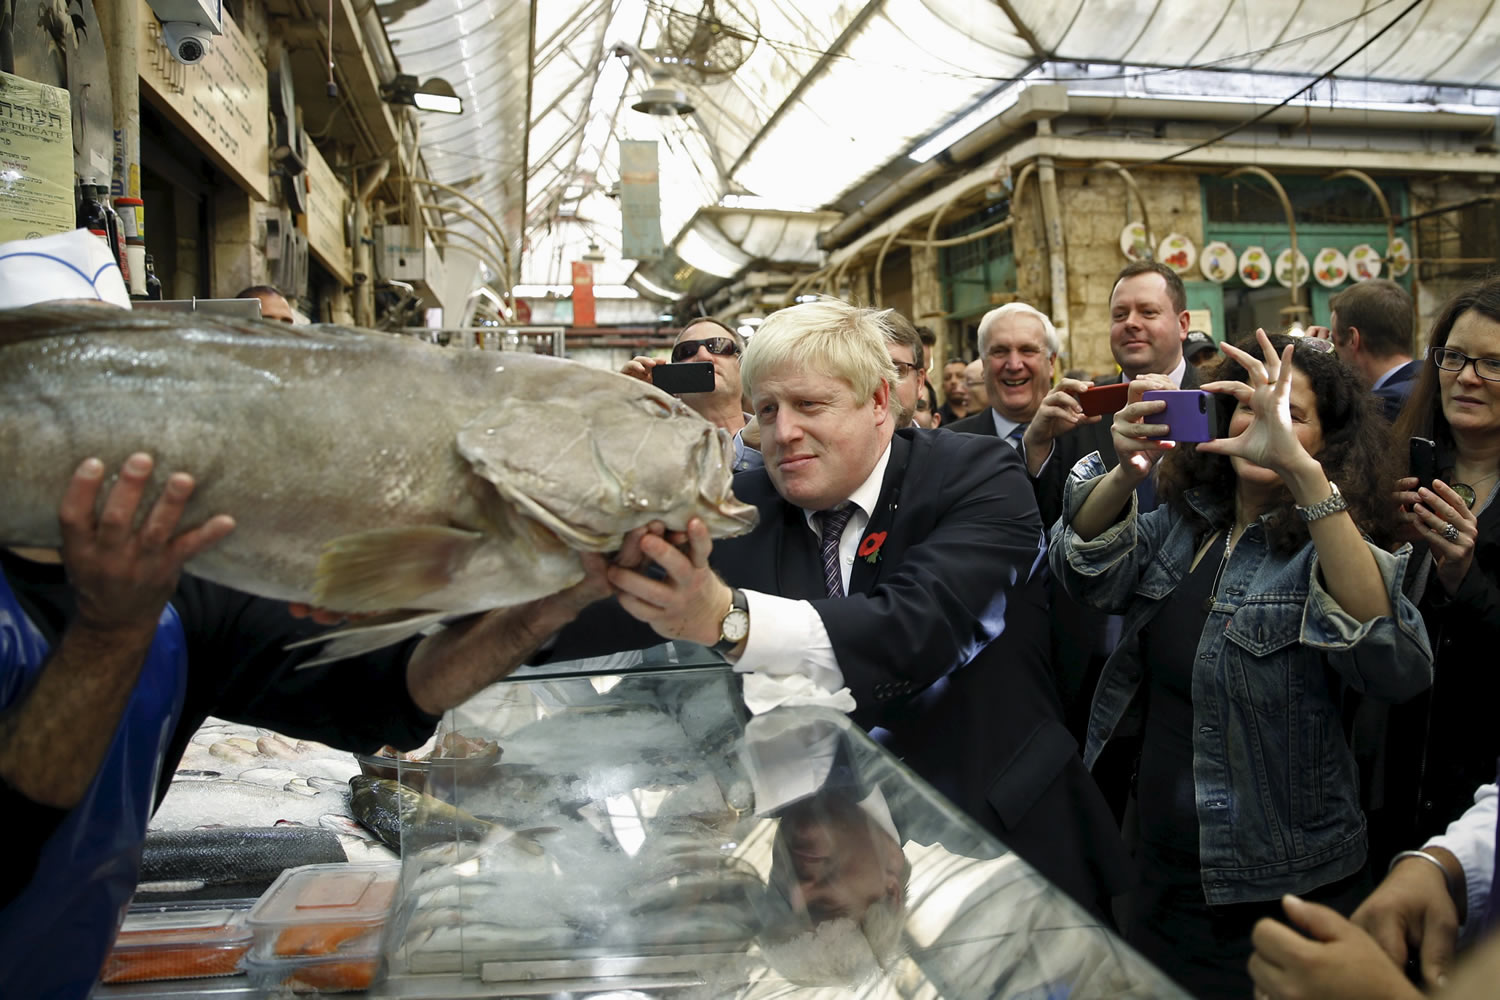 London mayor searches for the ‘big fish’ in Israel